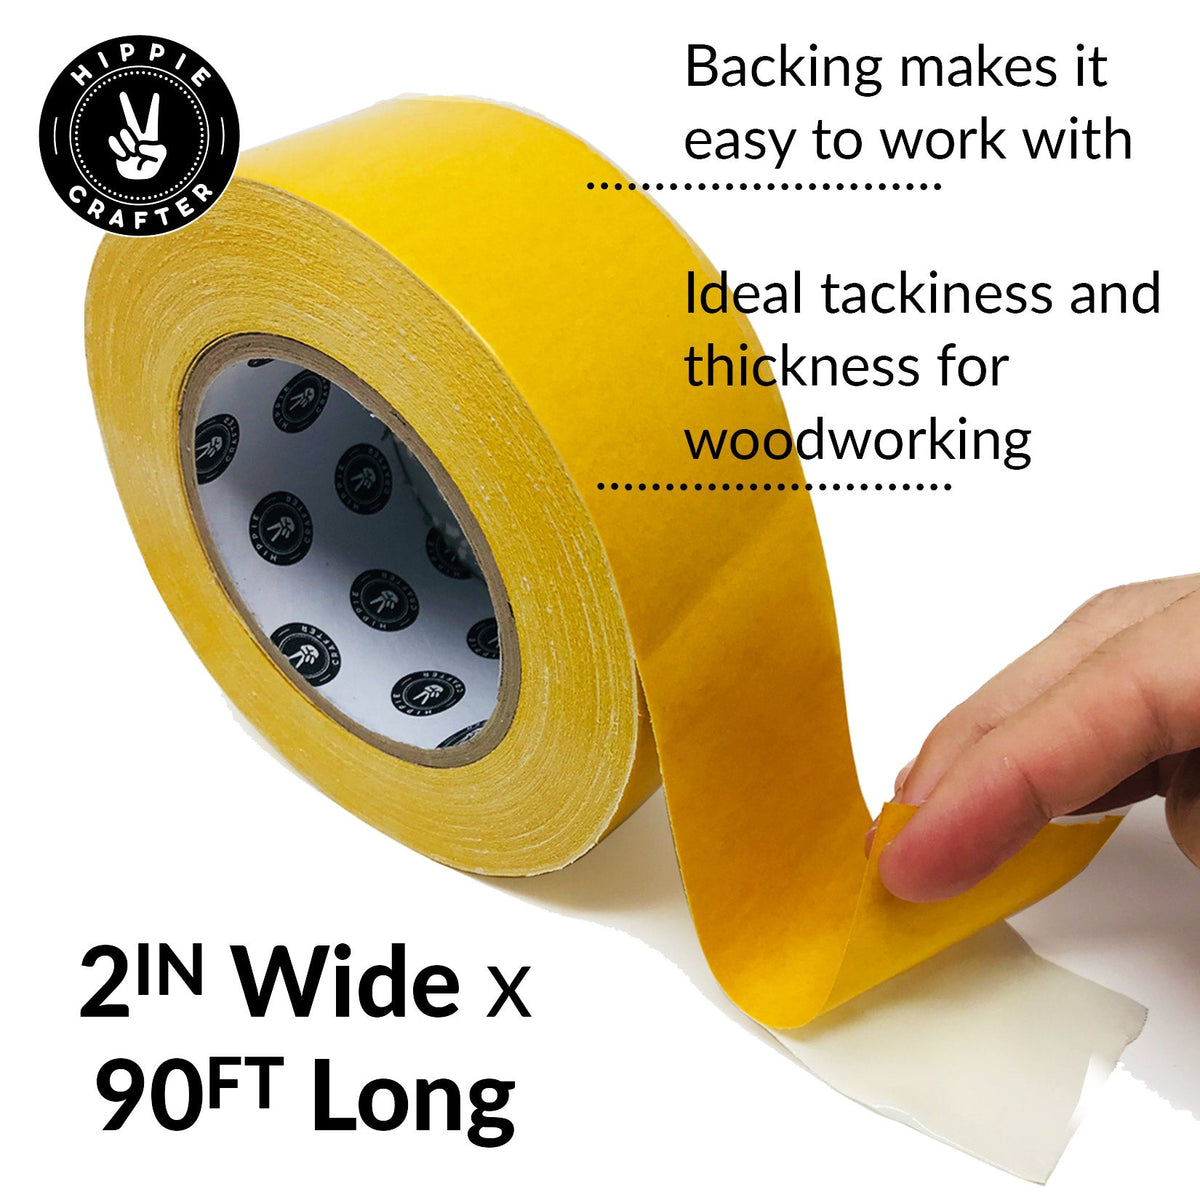 What double sided tape do you use? : r/BeginnerWoodWorking